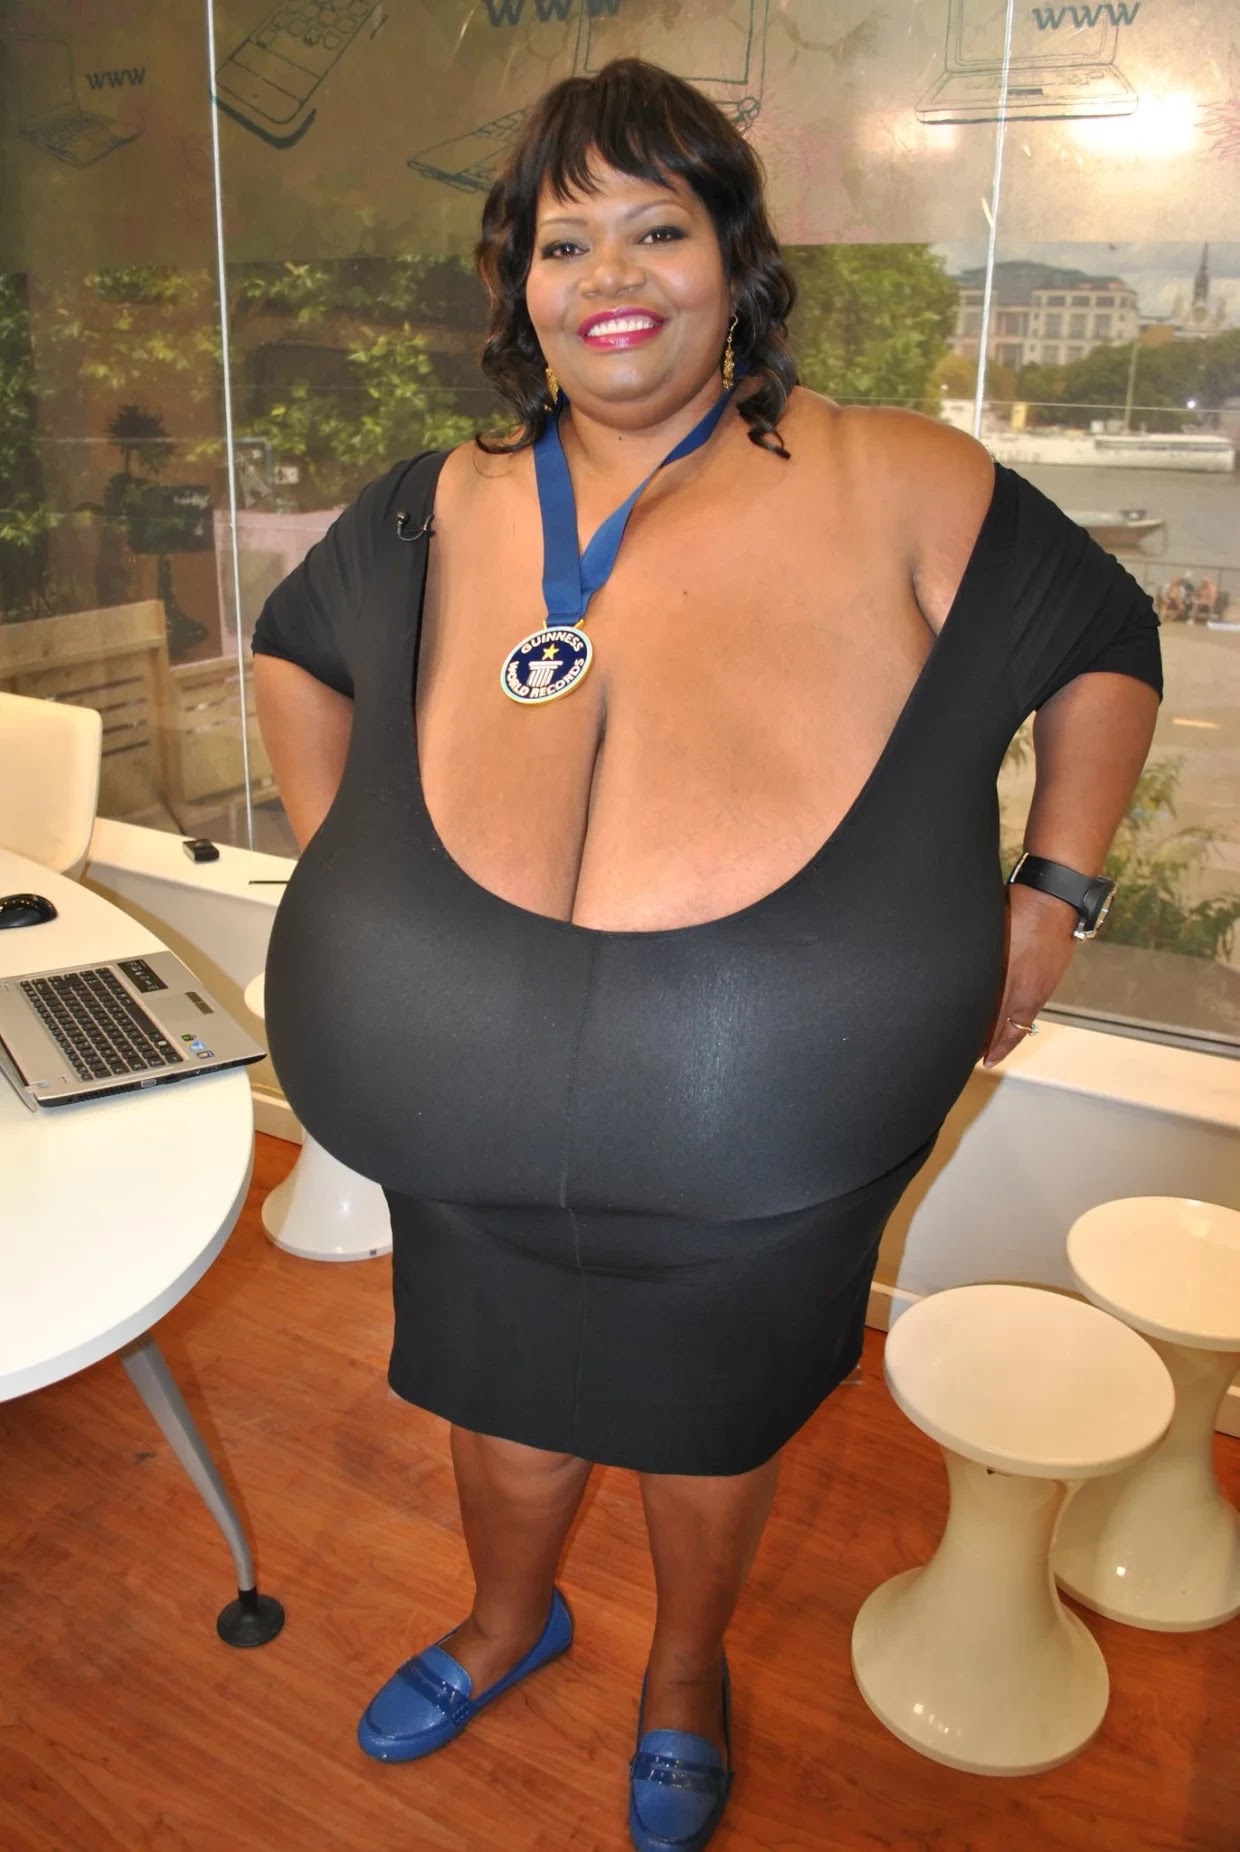 Woman World’s Biggest Breasts